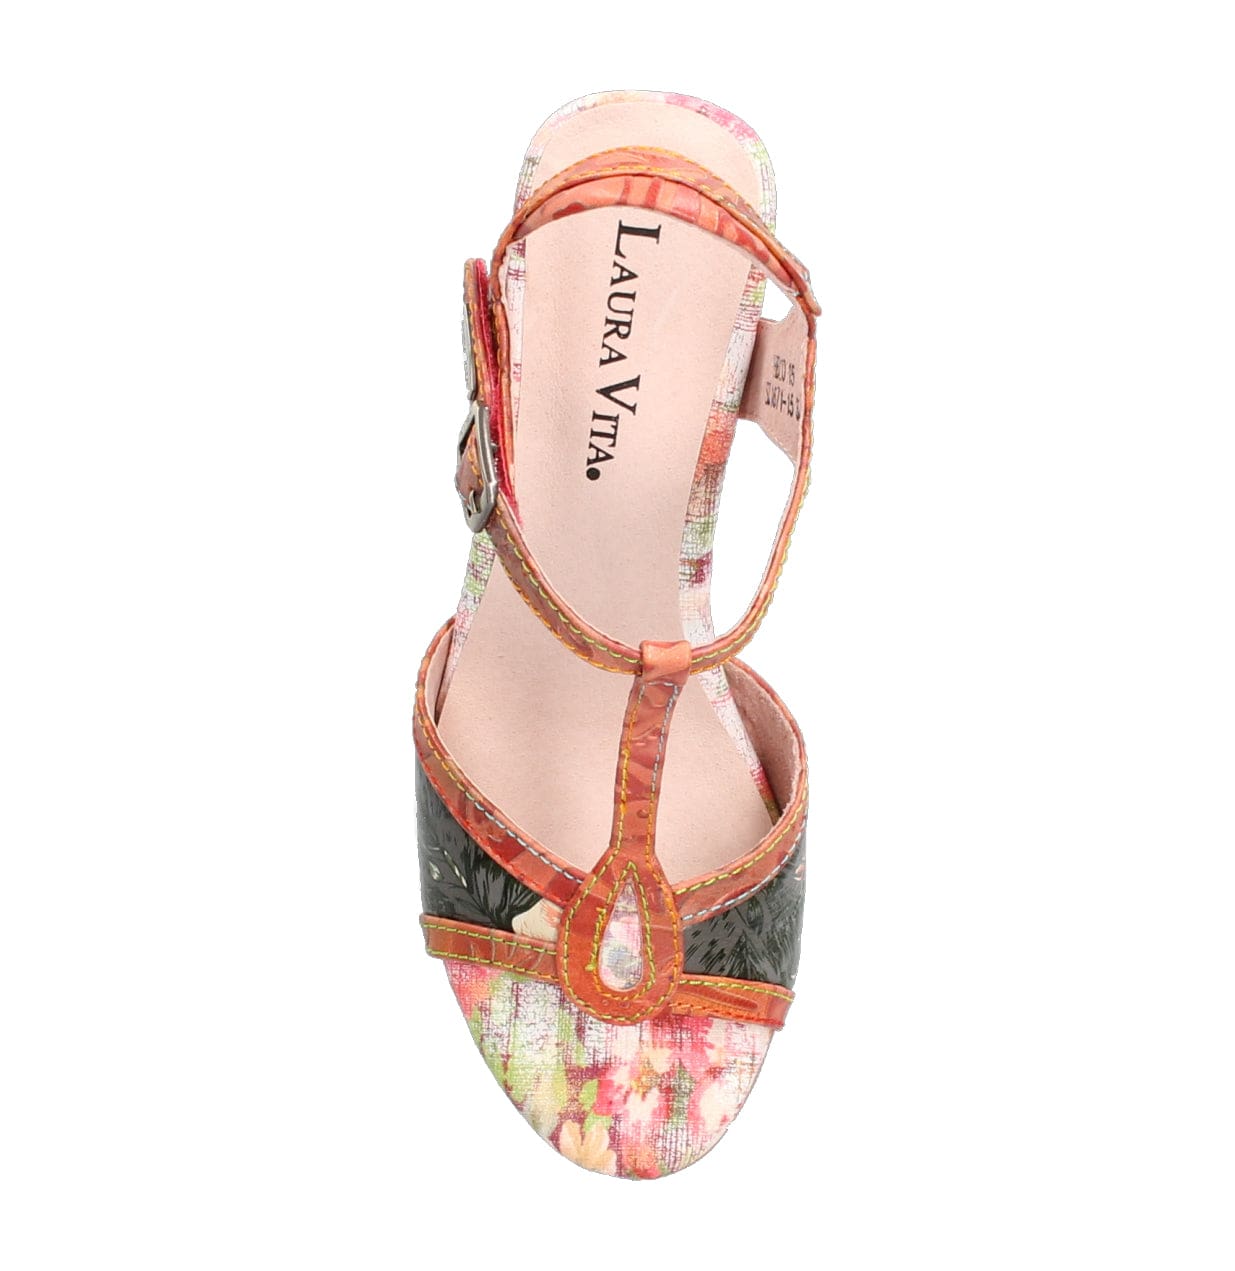 HECO 15 Shoes - Sandal